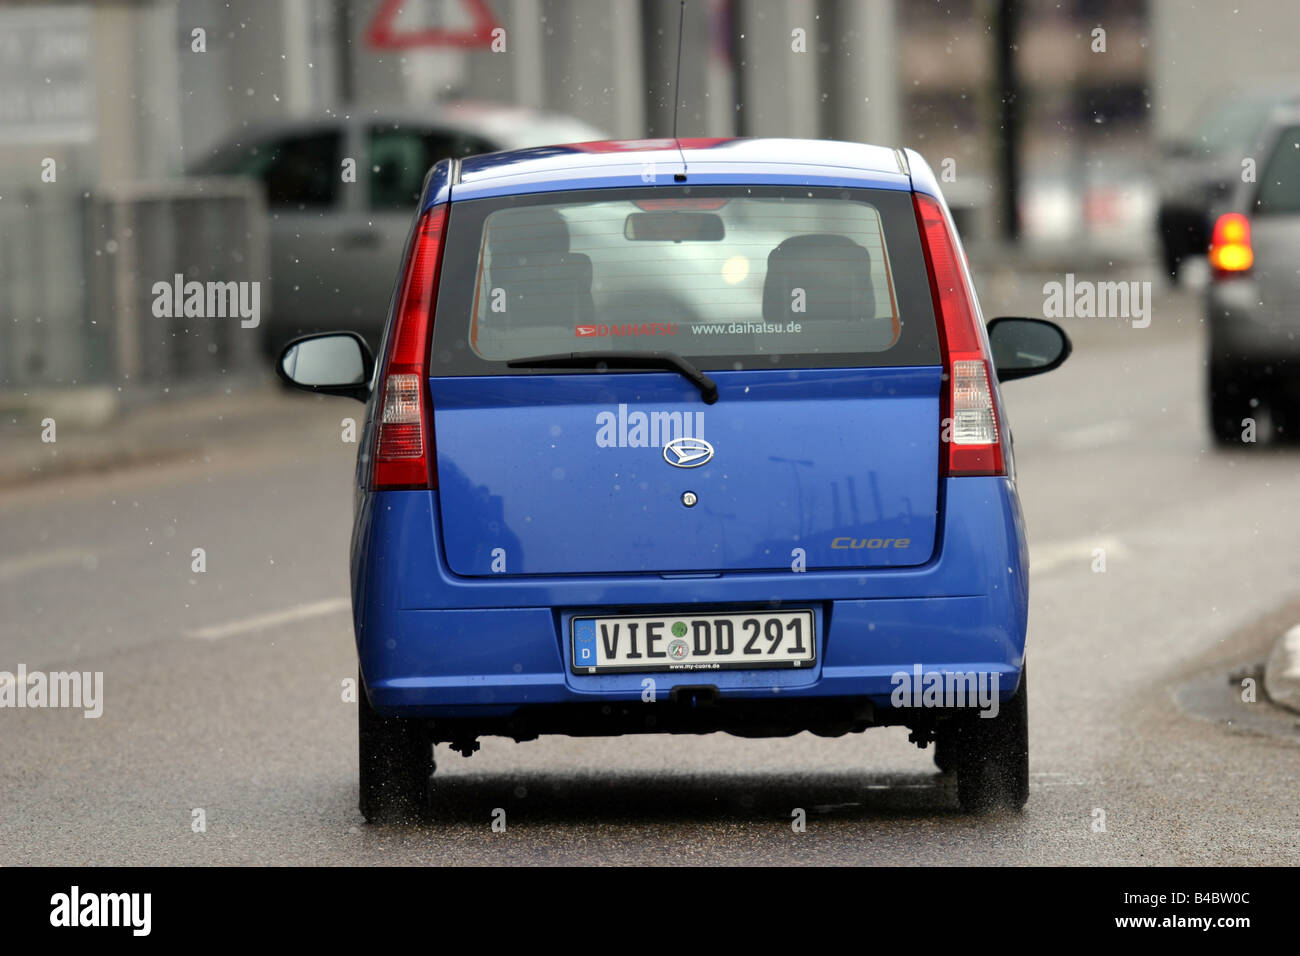 Car, Daihatsu Cuore 1.0 Top, Miniapprox.s, Limousine, model year 2004-, blue moving, rear view, City, photographer: Hans Dieter Stock Photo